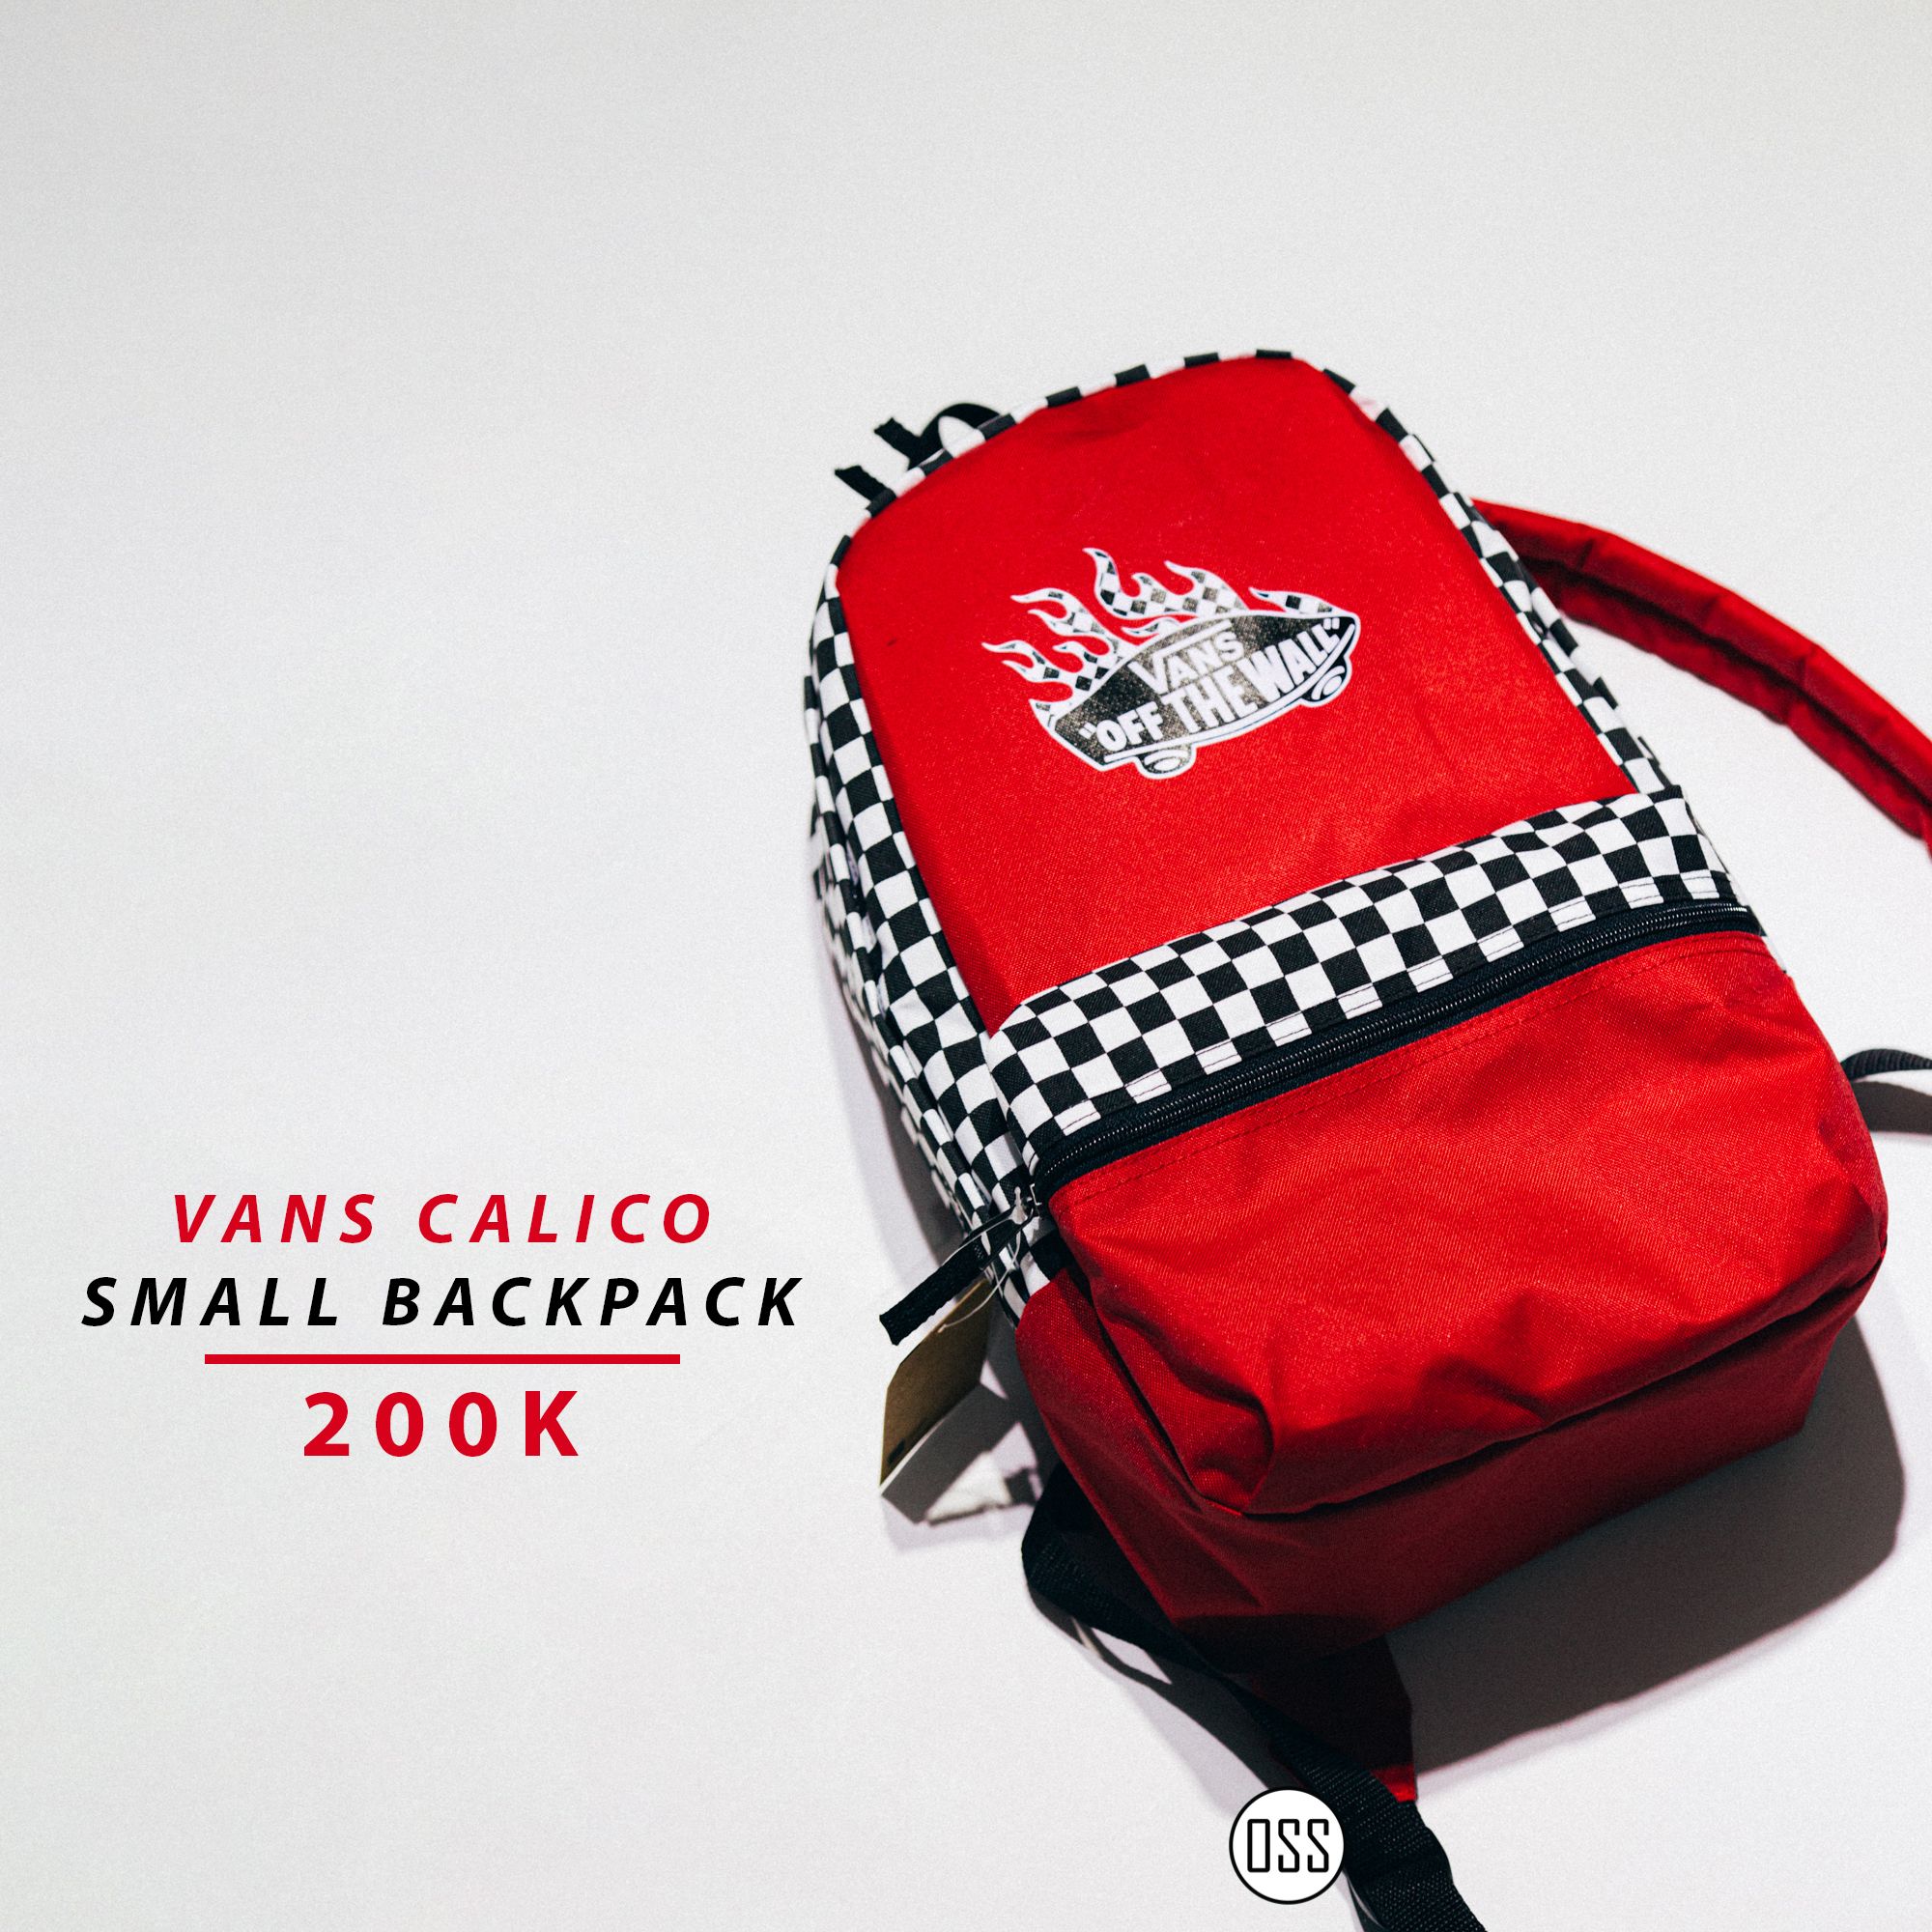  Vans Calico Small Backpack 